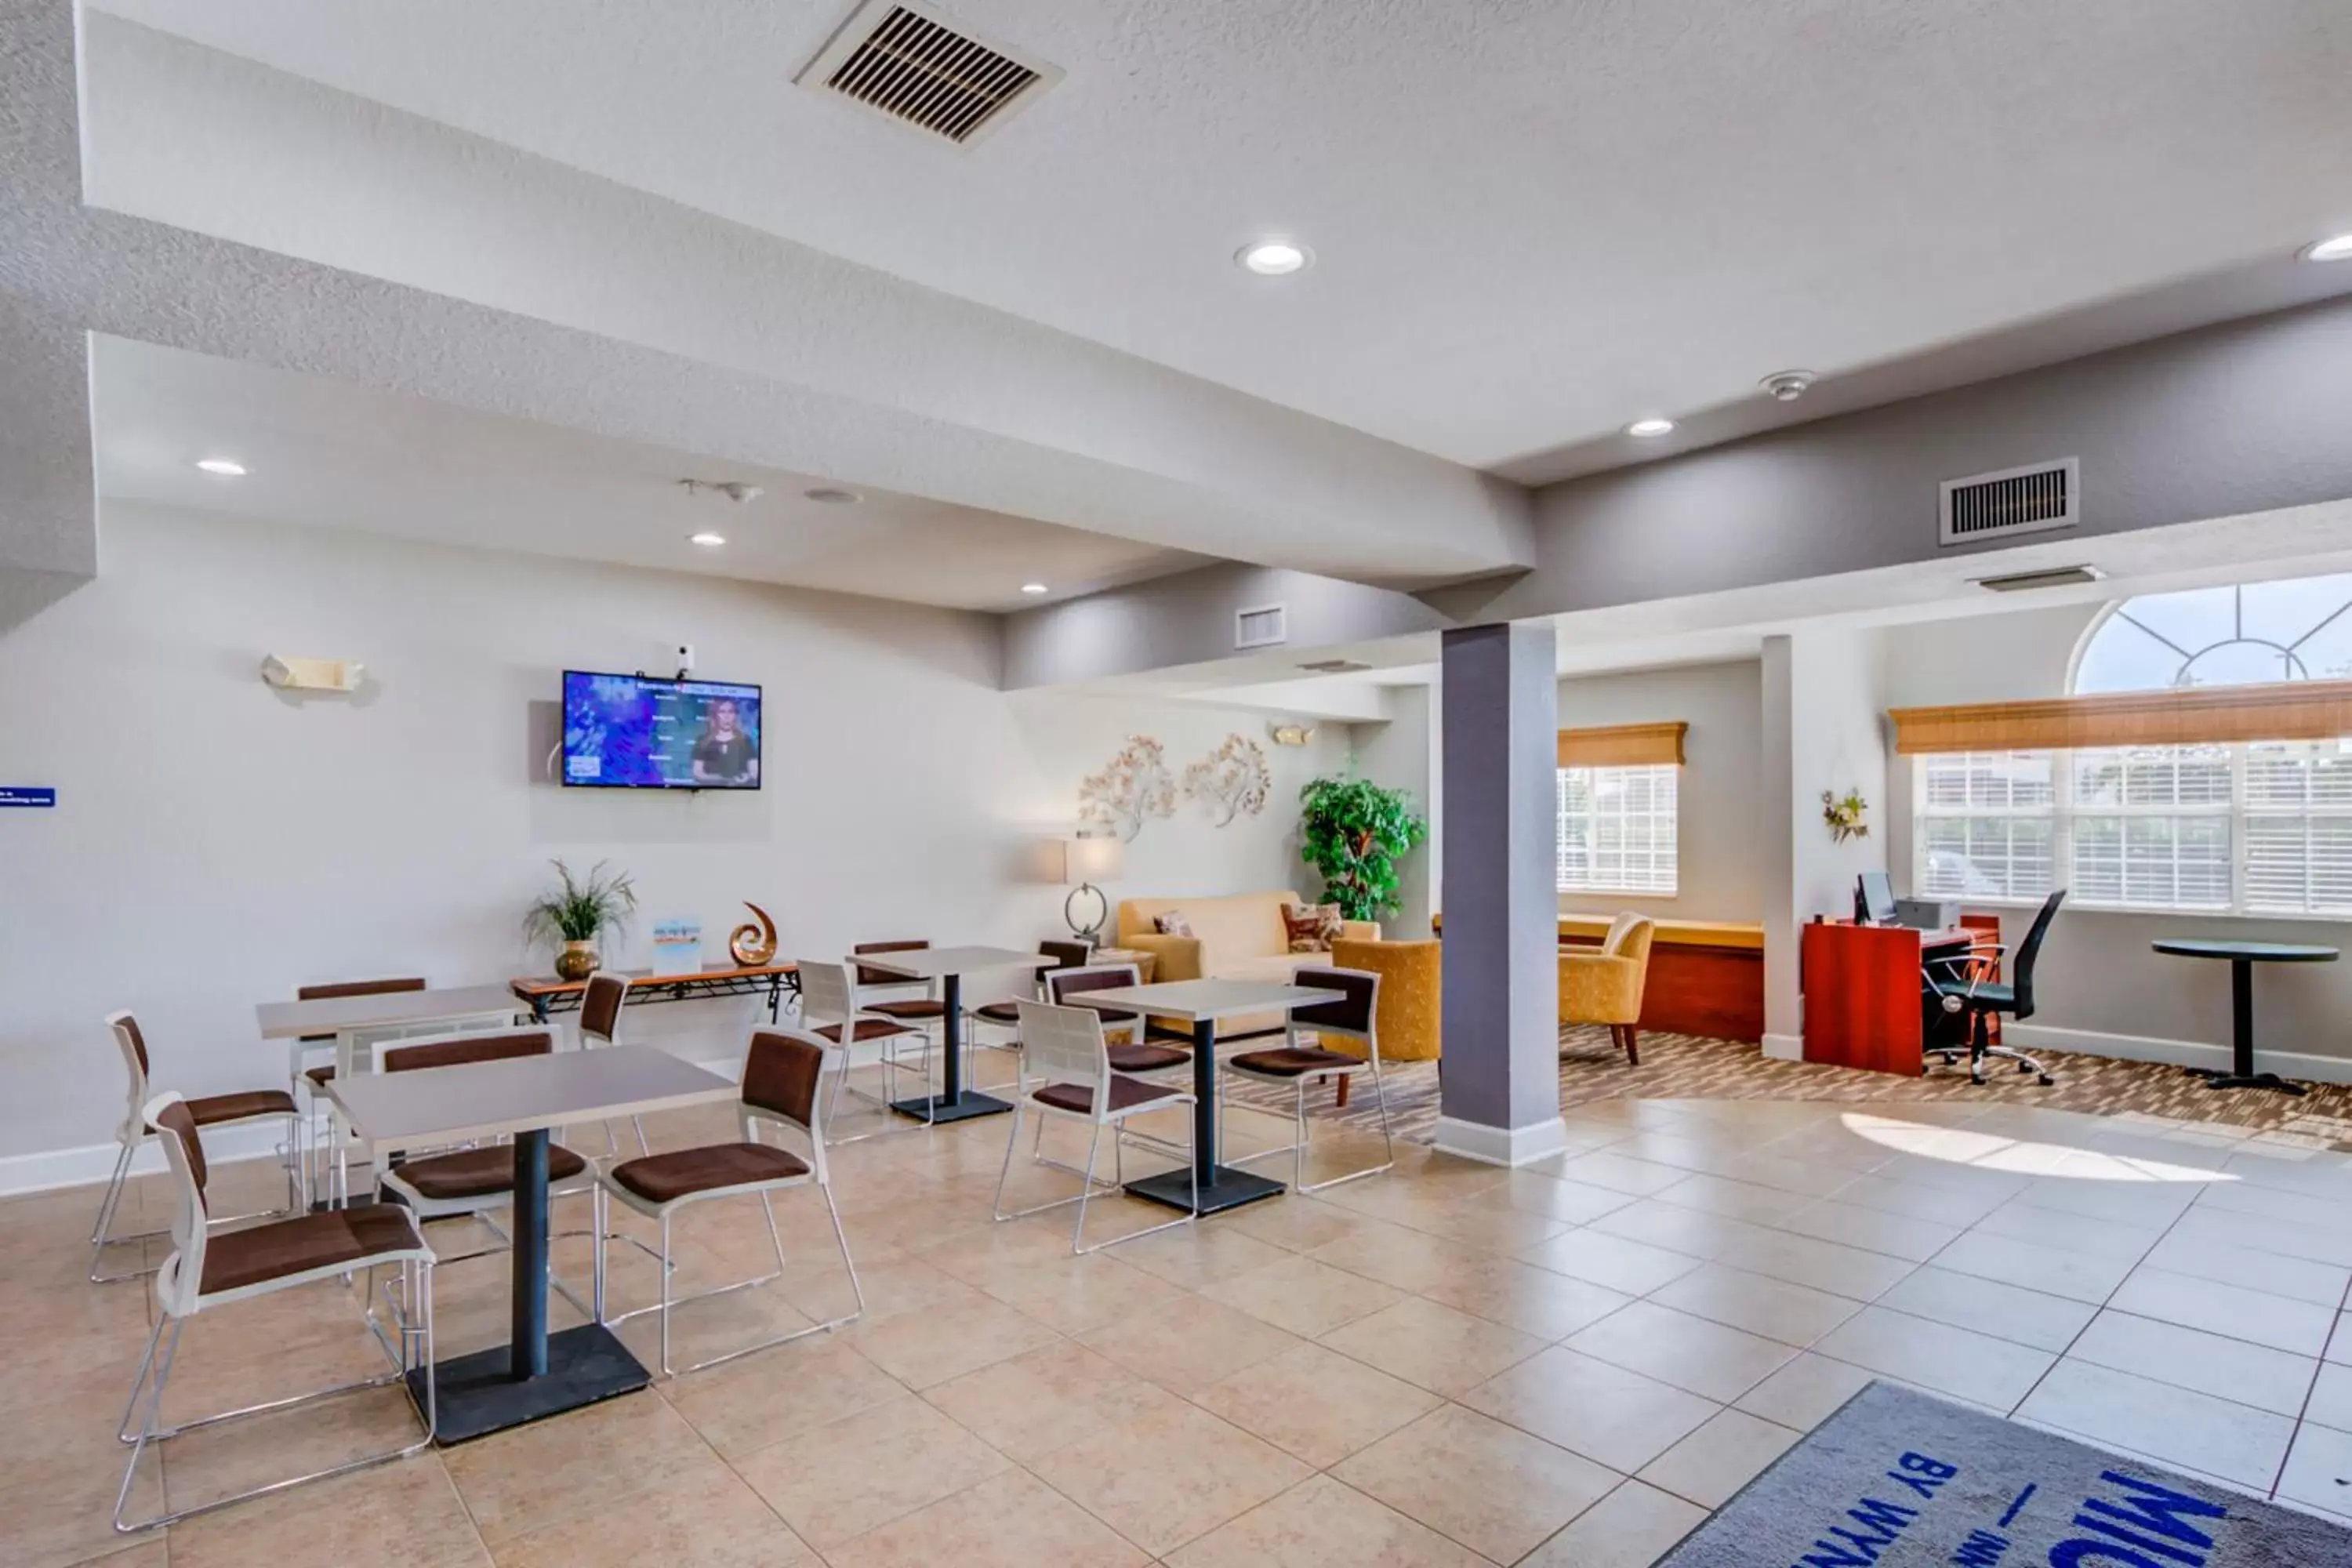 Lobby or reception in Microtel Inn and Suites - Zephyrhills